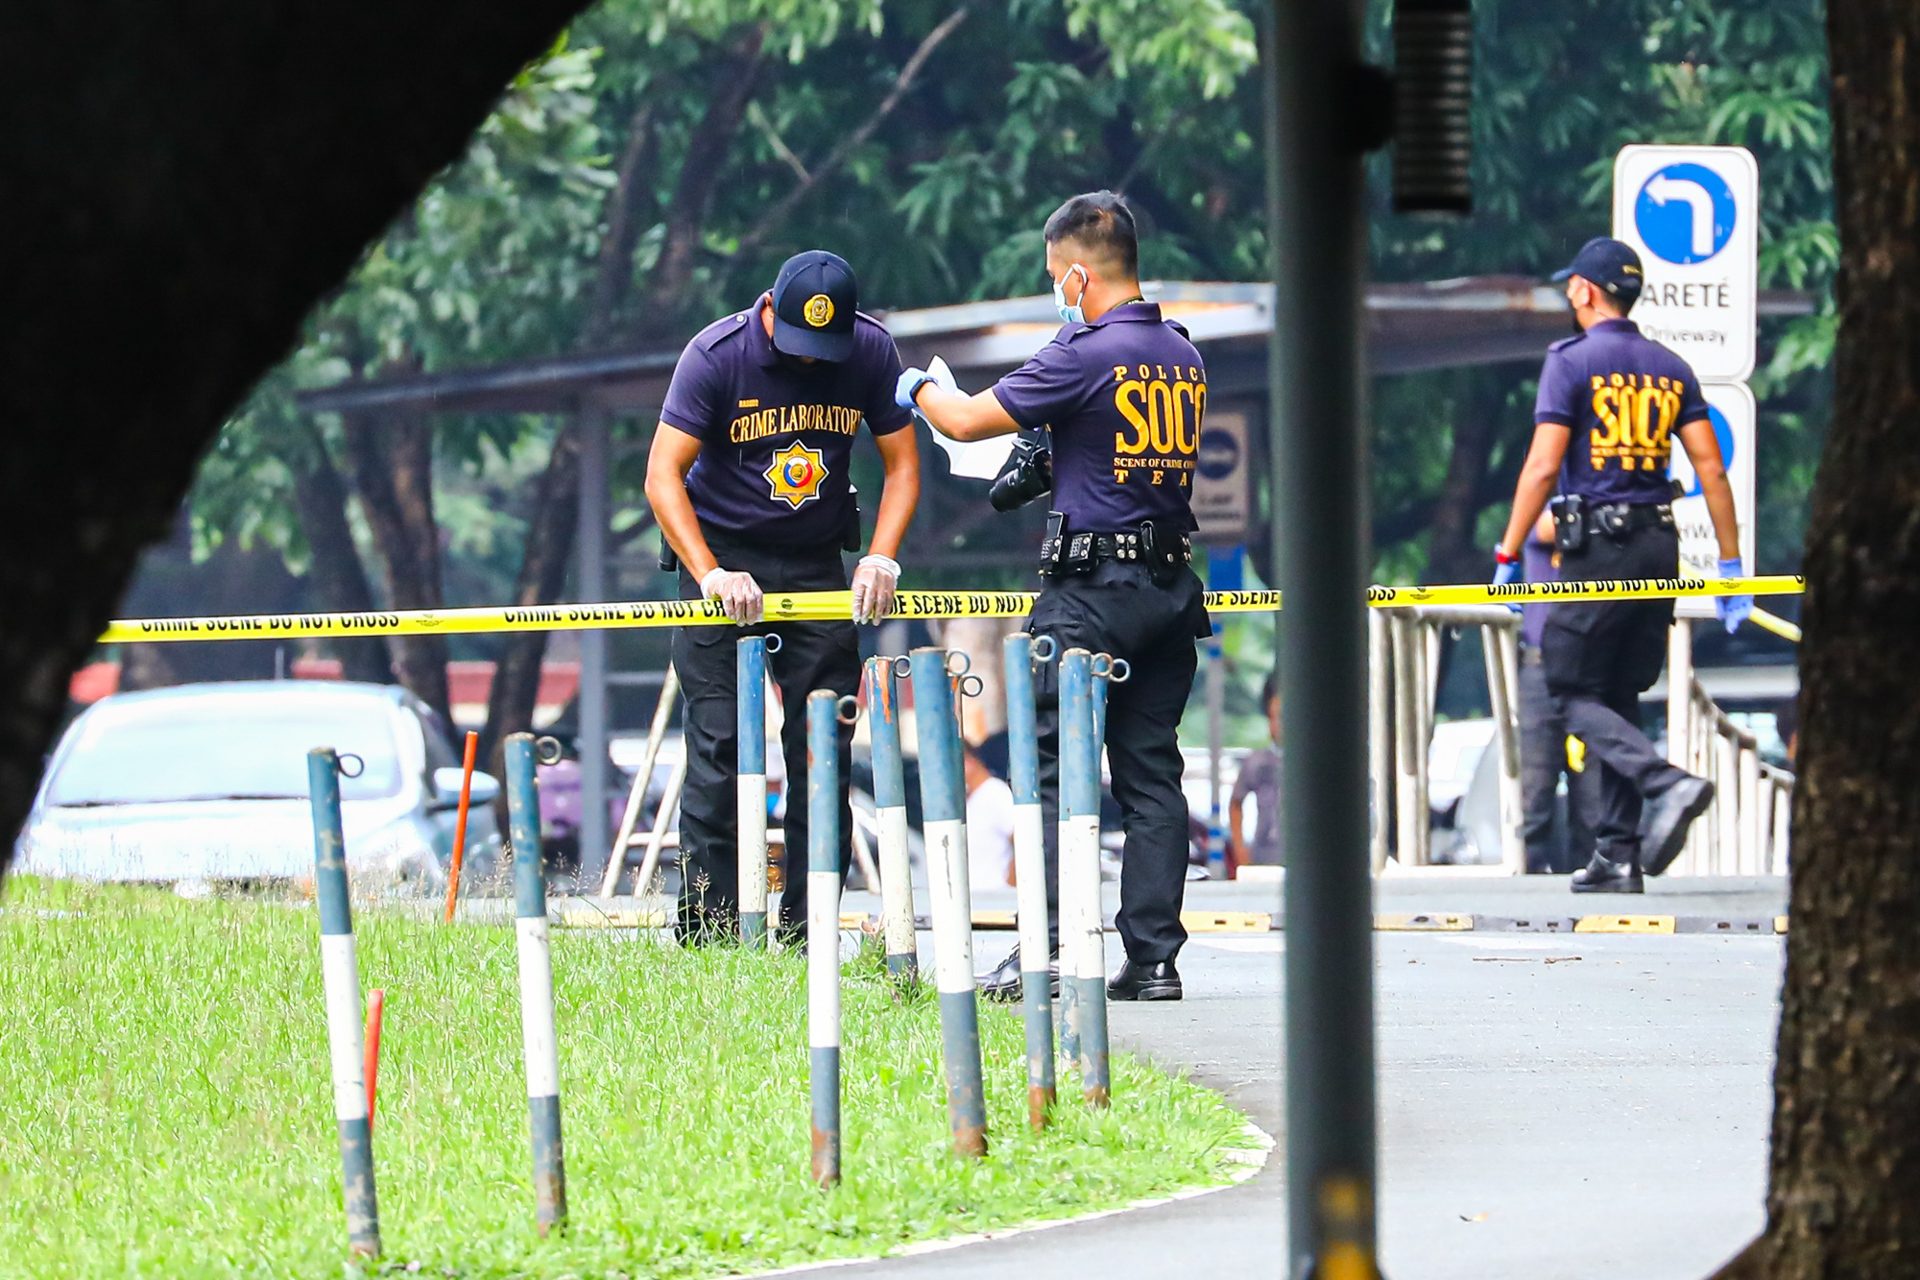 TIMELINE: What happened during the Ateneo shooting incident